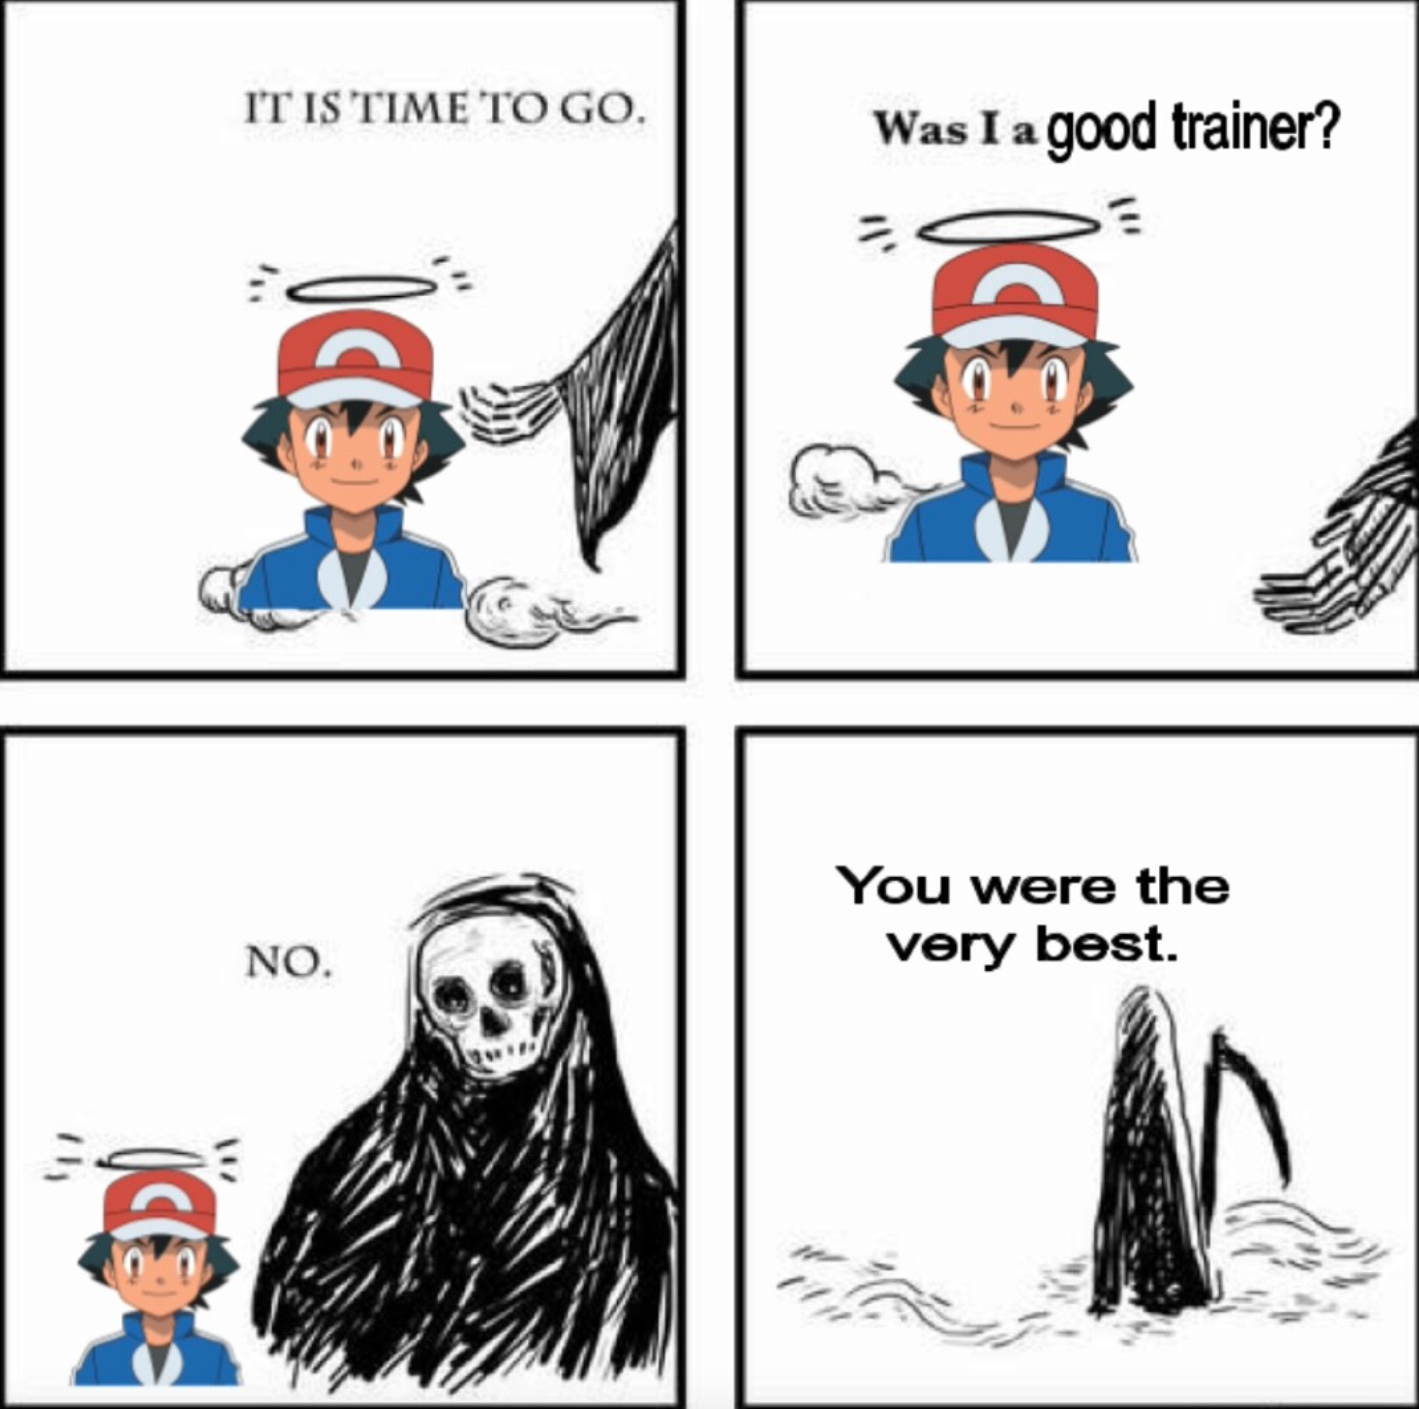 You know I had to do it, RIP Ash